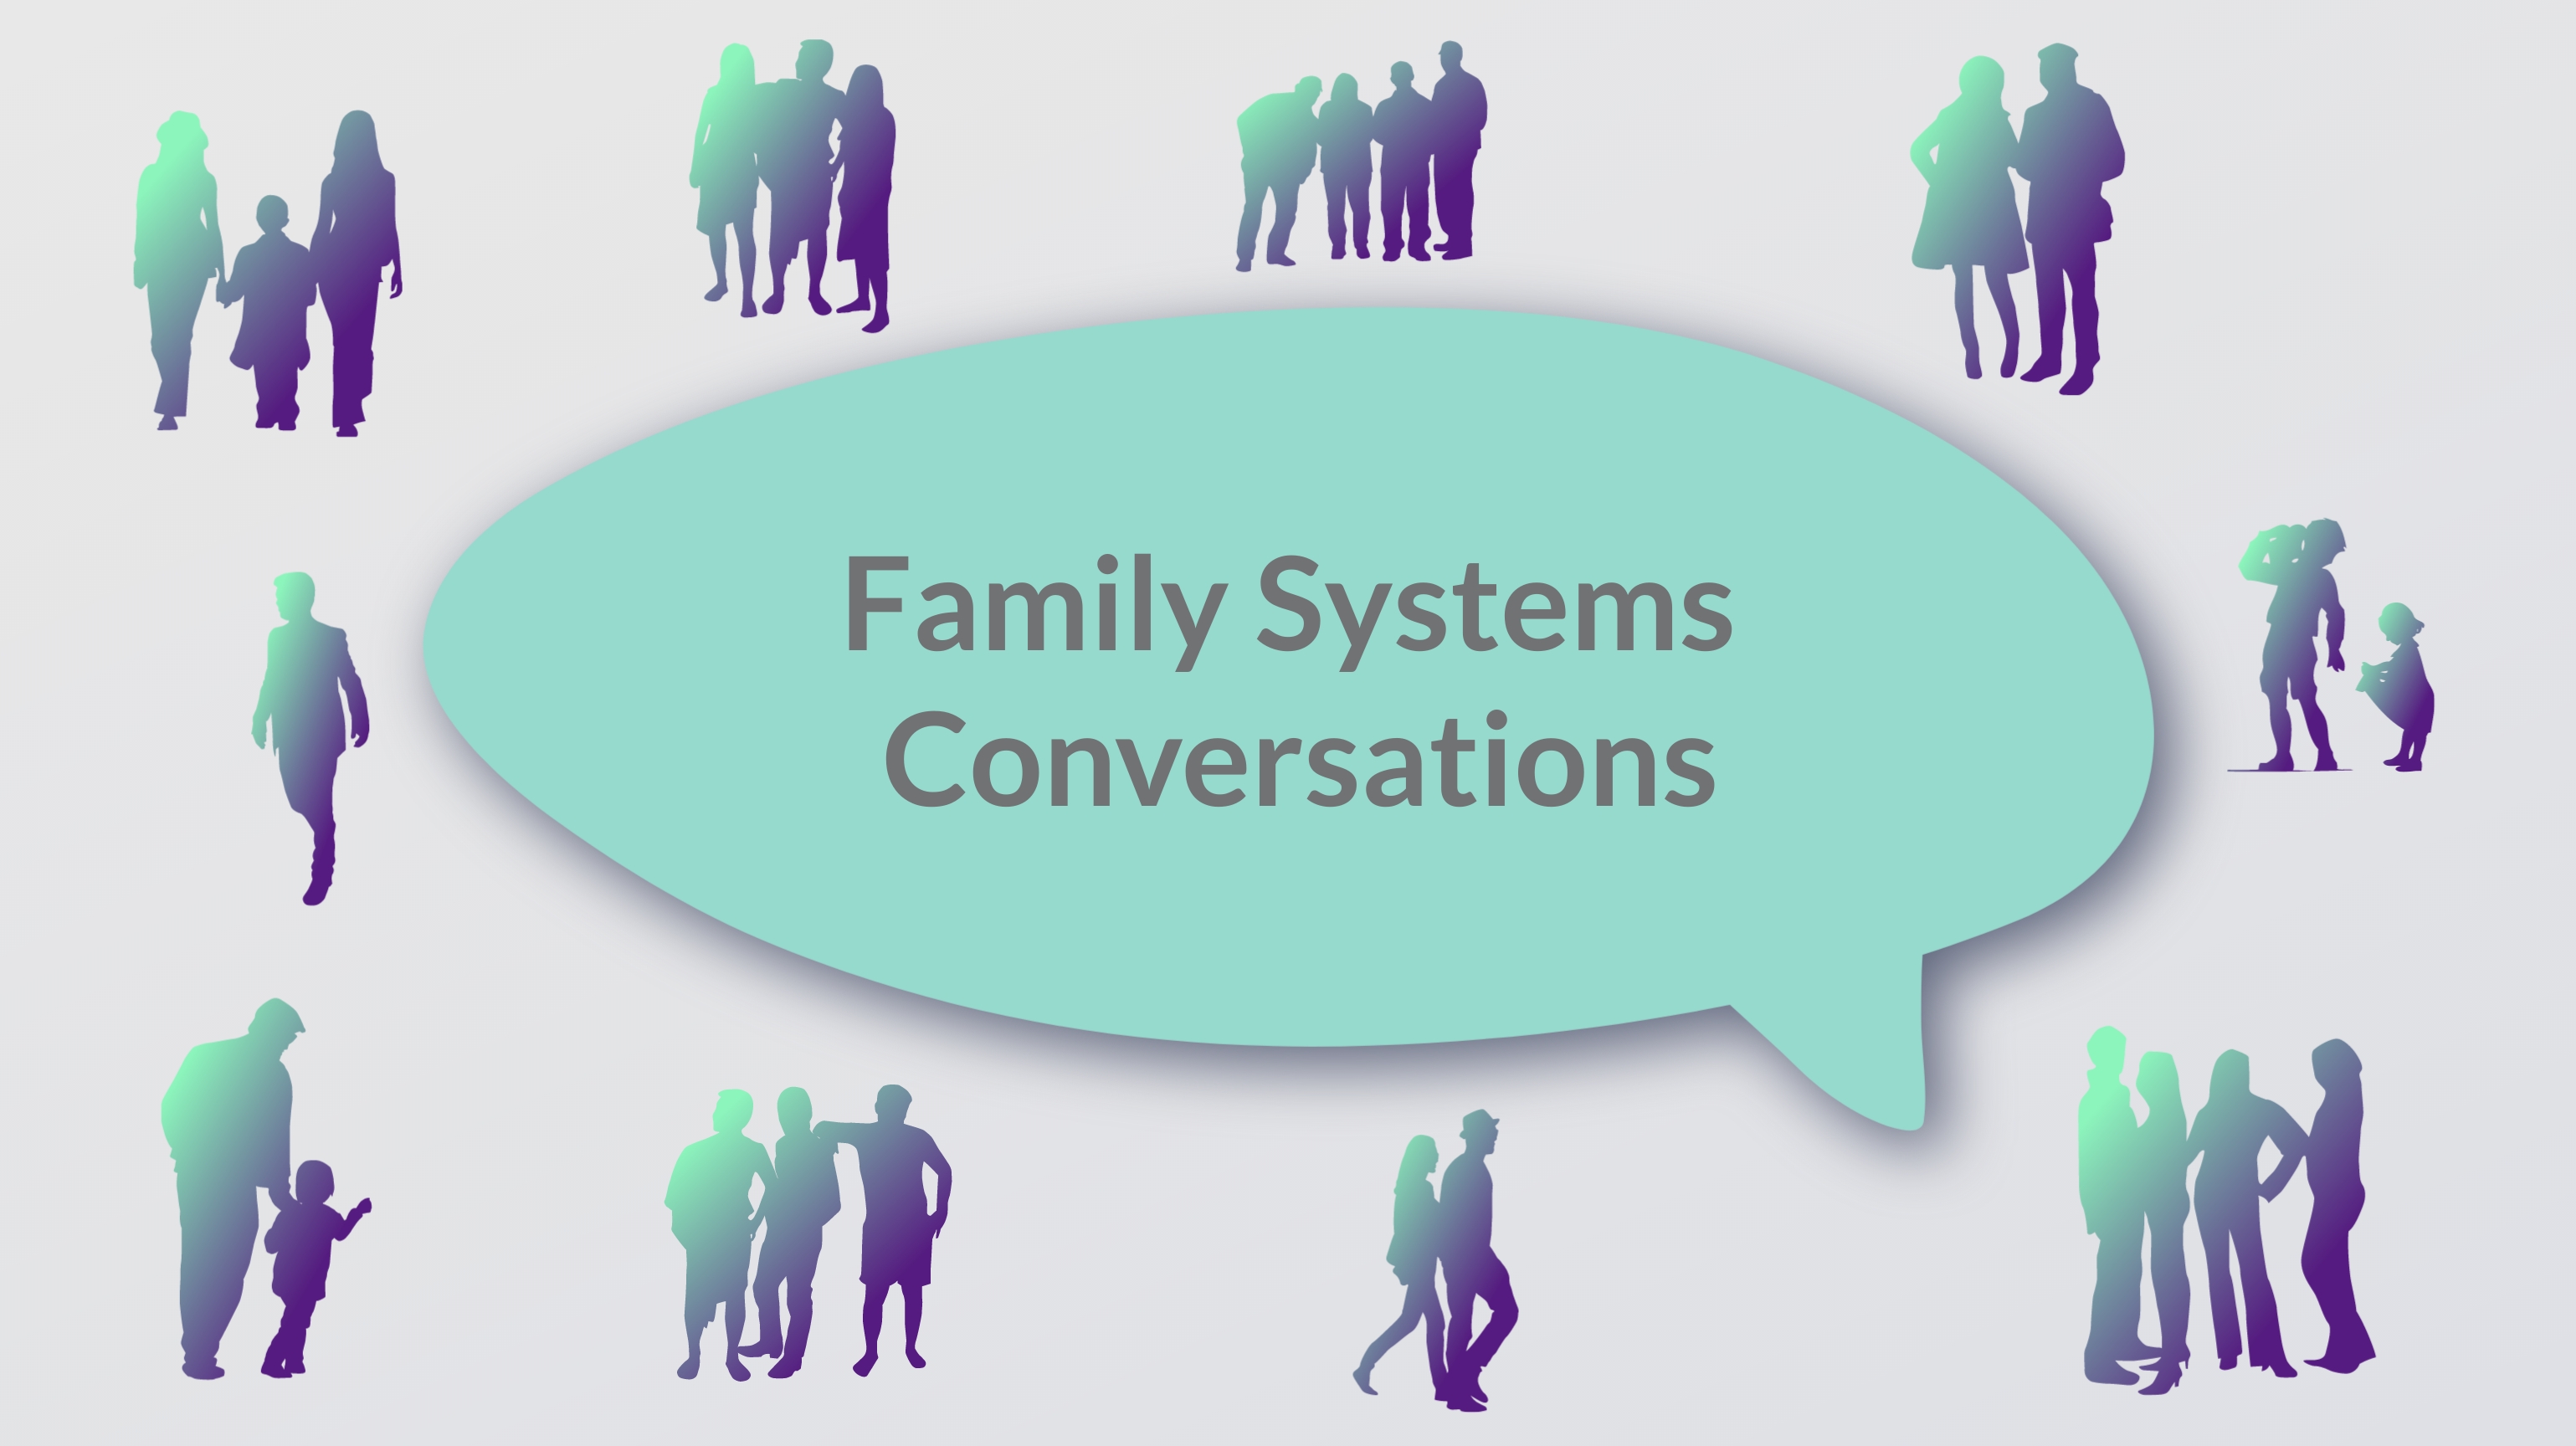 Recommendations for Family Systems Conversations